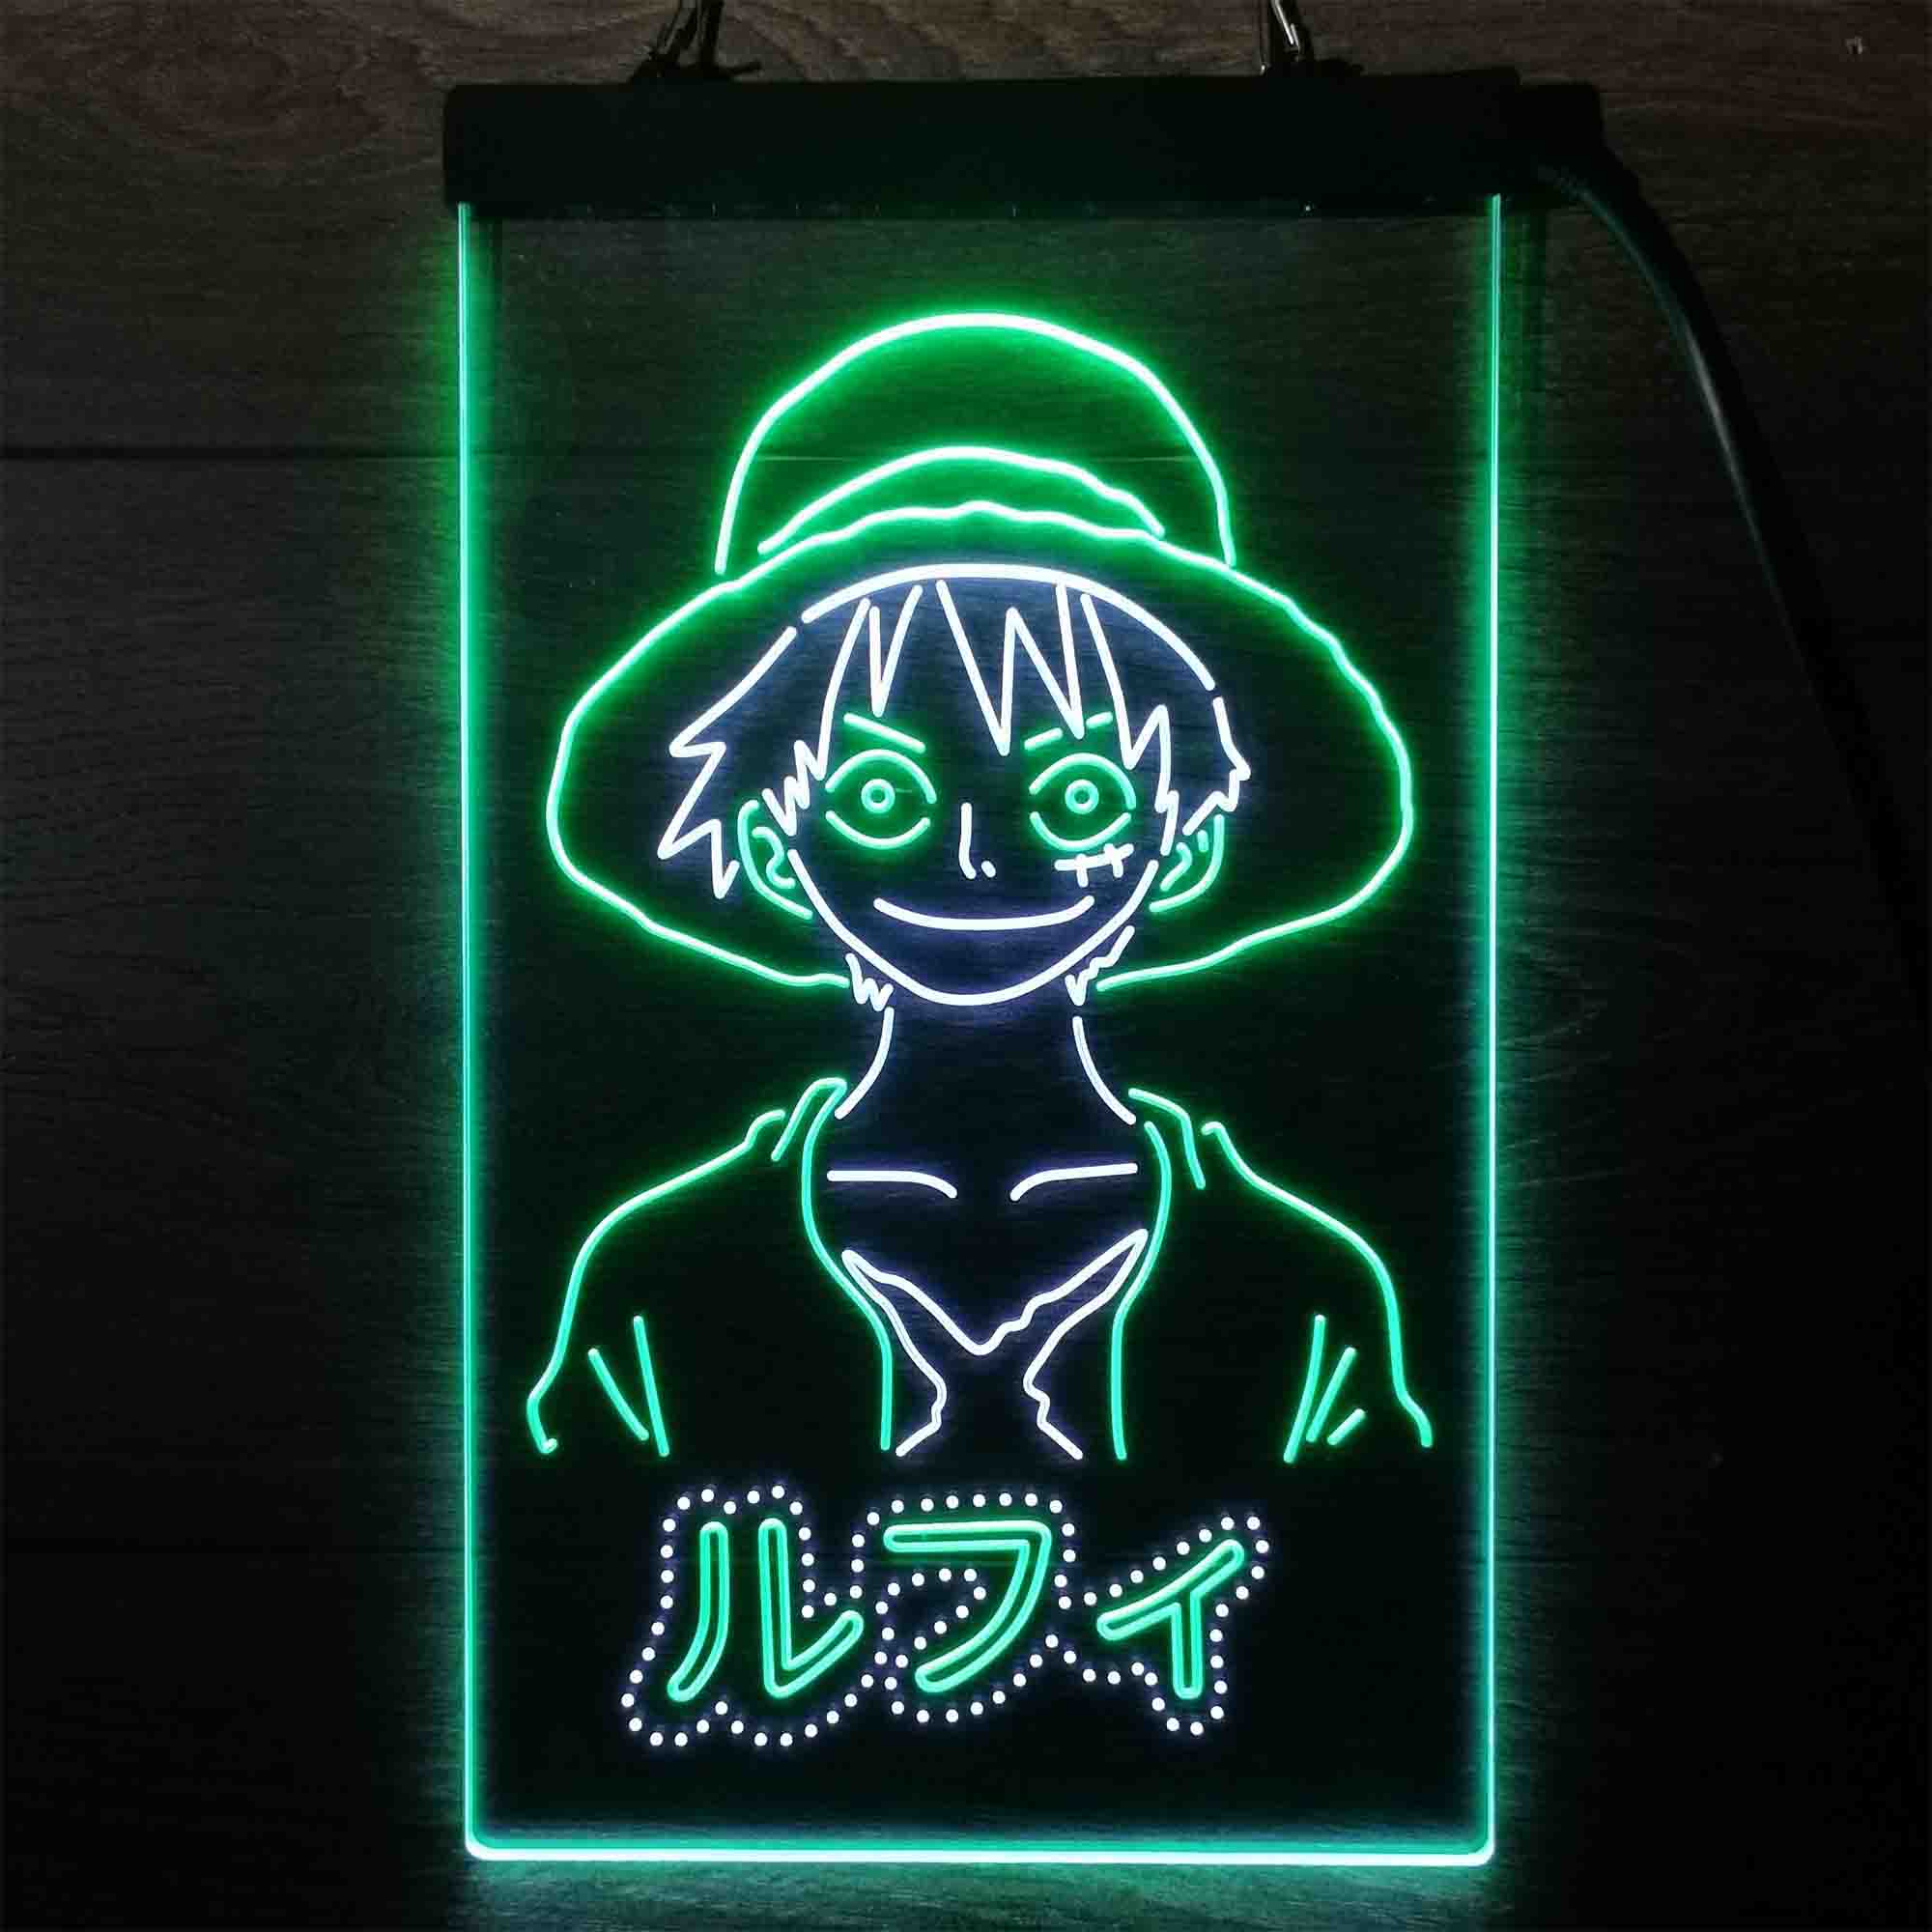 https://proledsign.com/cdn/shop/products/Monkey-D-Luffy-One-Piece-Neon-LED-Sign-Business-Industrial-Signage-Electric-Signs-LED-Signs-Proledsign-White-Green-SMALL-8-x-12-INCHES-10.jpg?v=1671781209